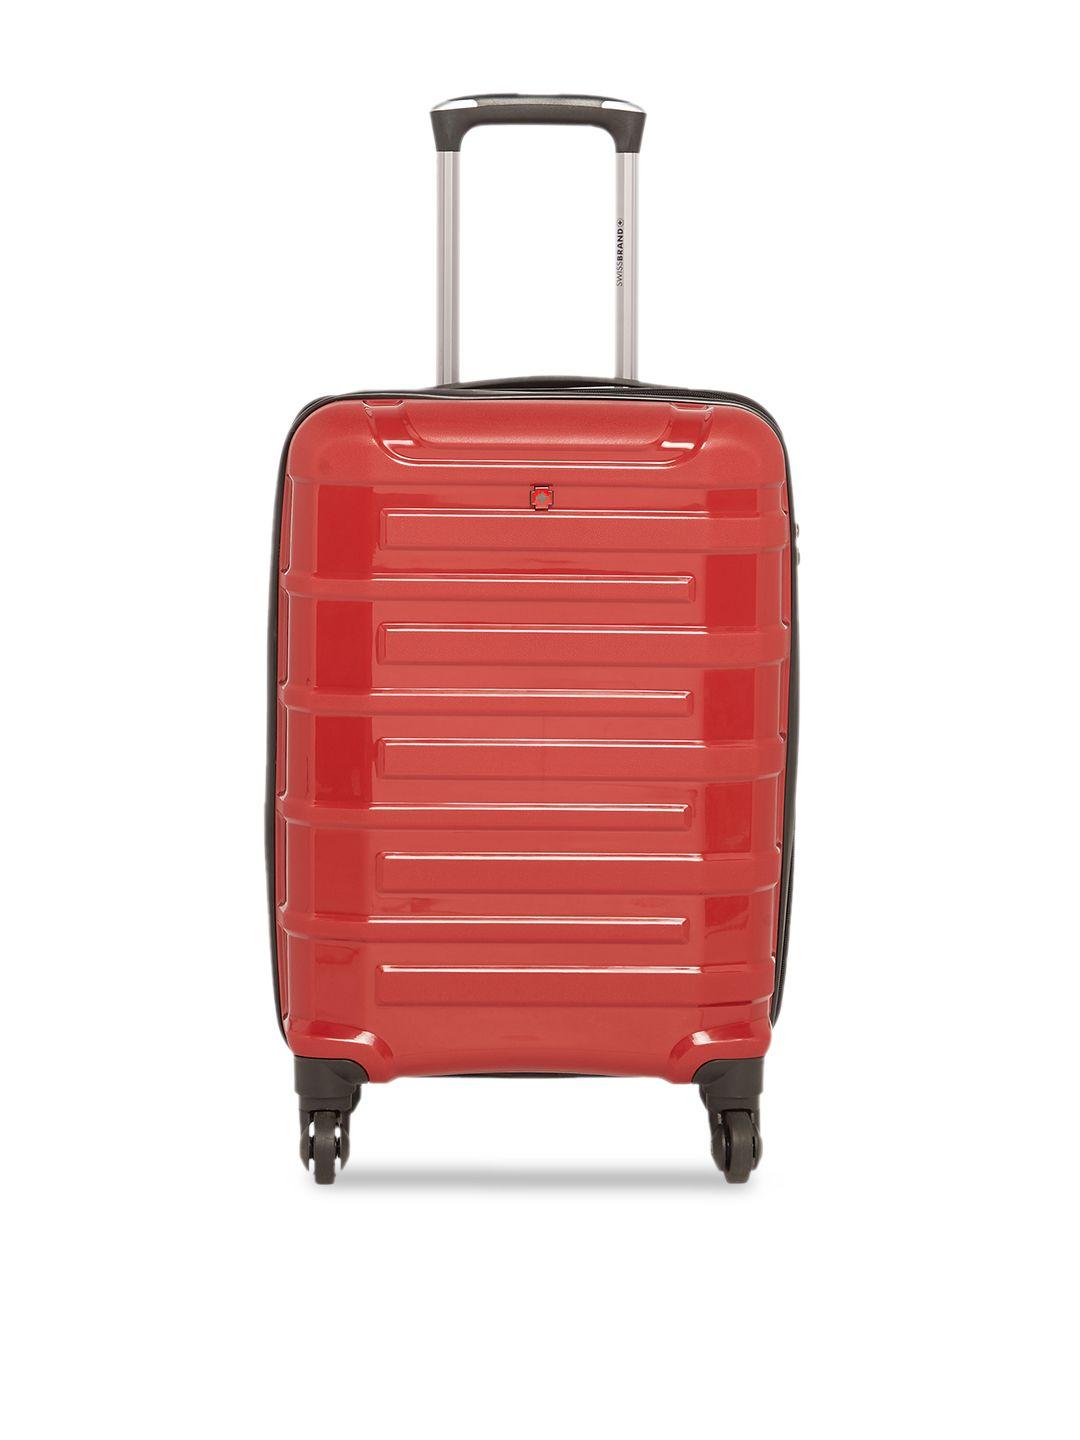 swiss brand red & grey solid sion 360-degree rotation hard-sided cabin trolley suitcase